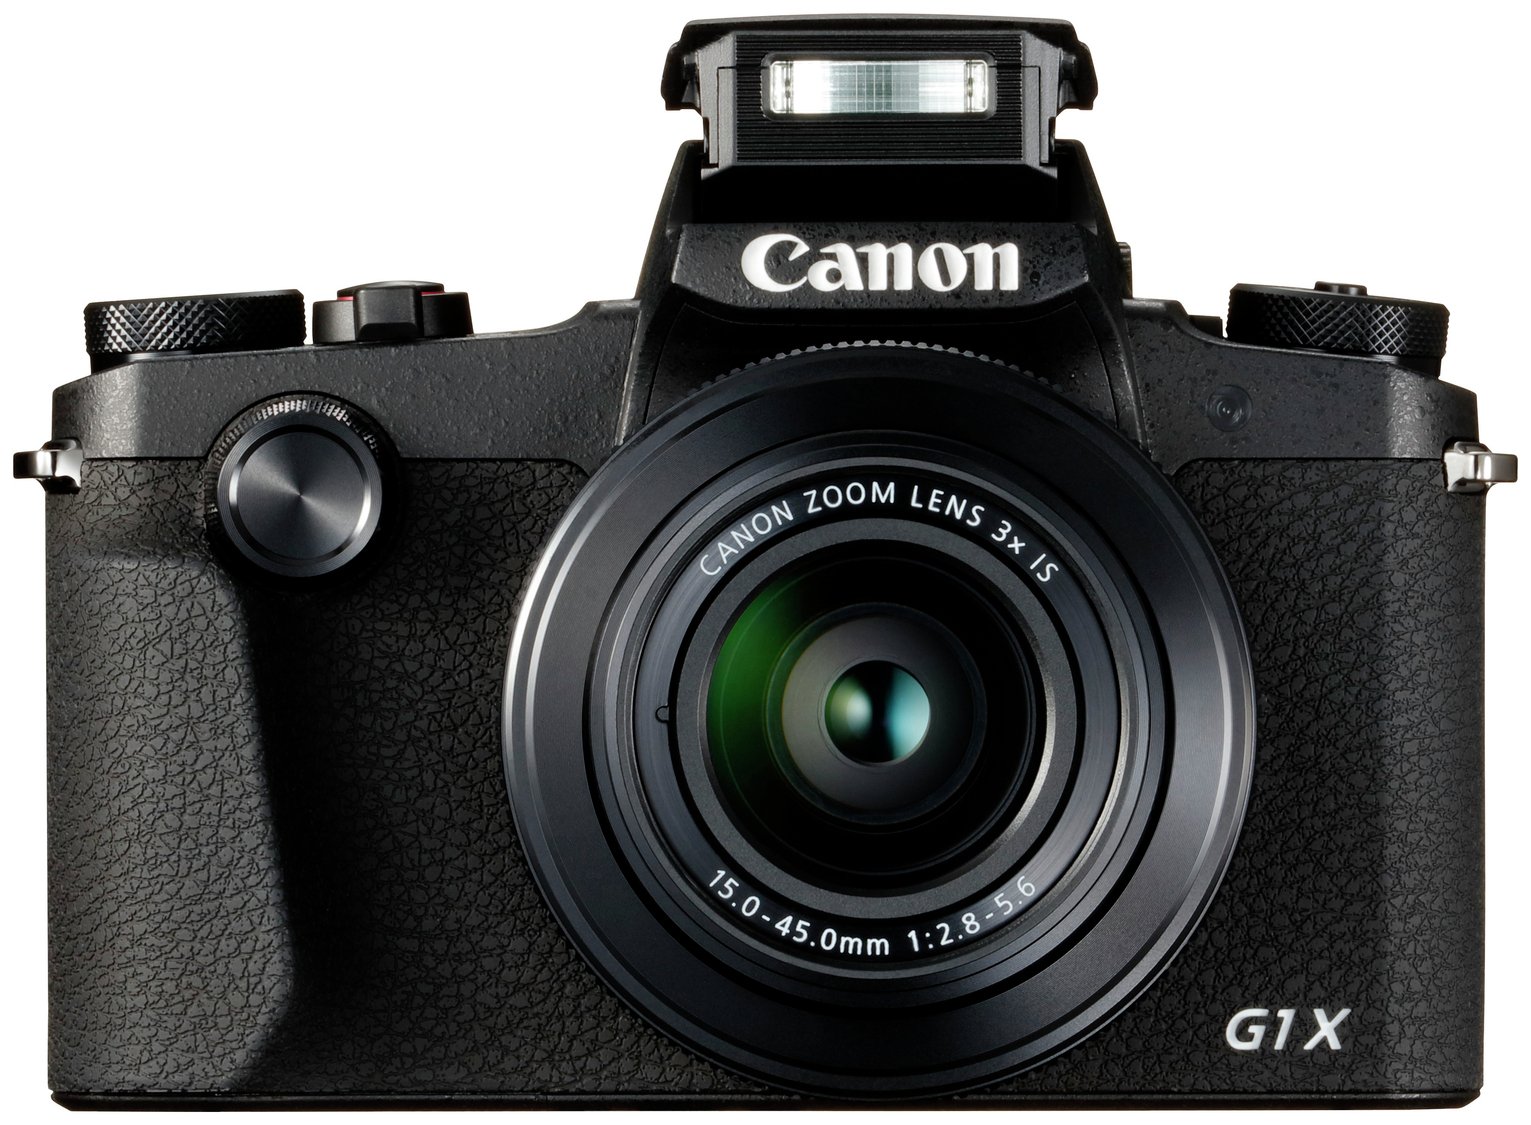 Canon PowerShot G1X MKIII 24.2MP 3x Zoom Camera Review